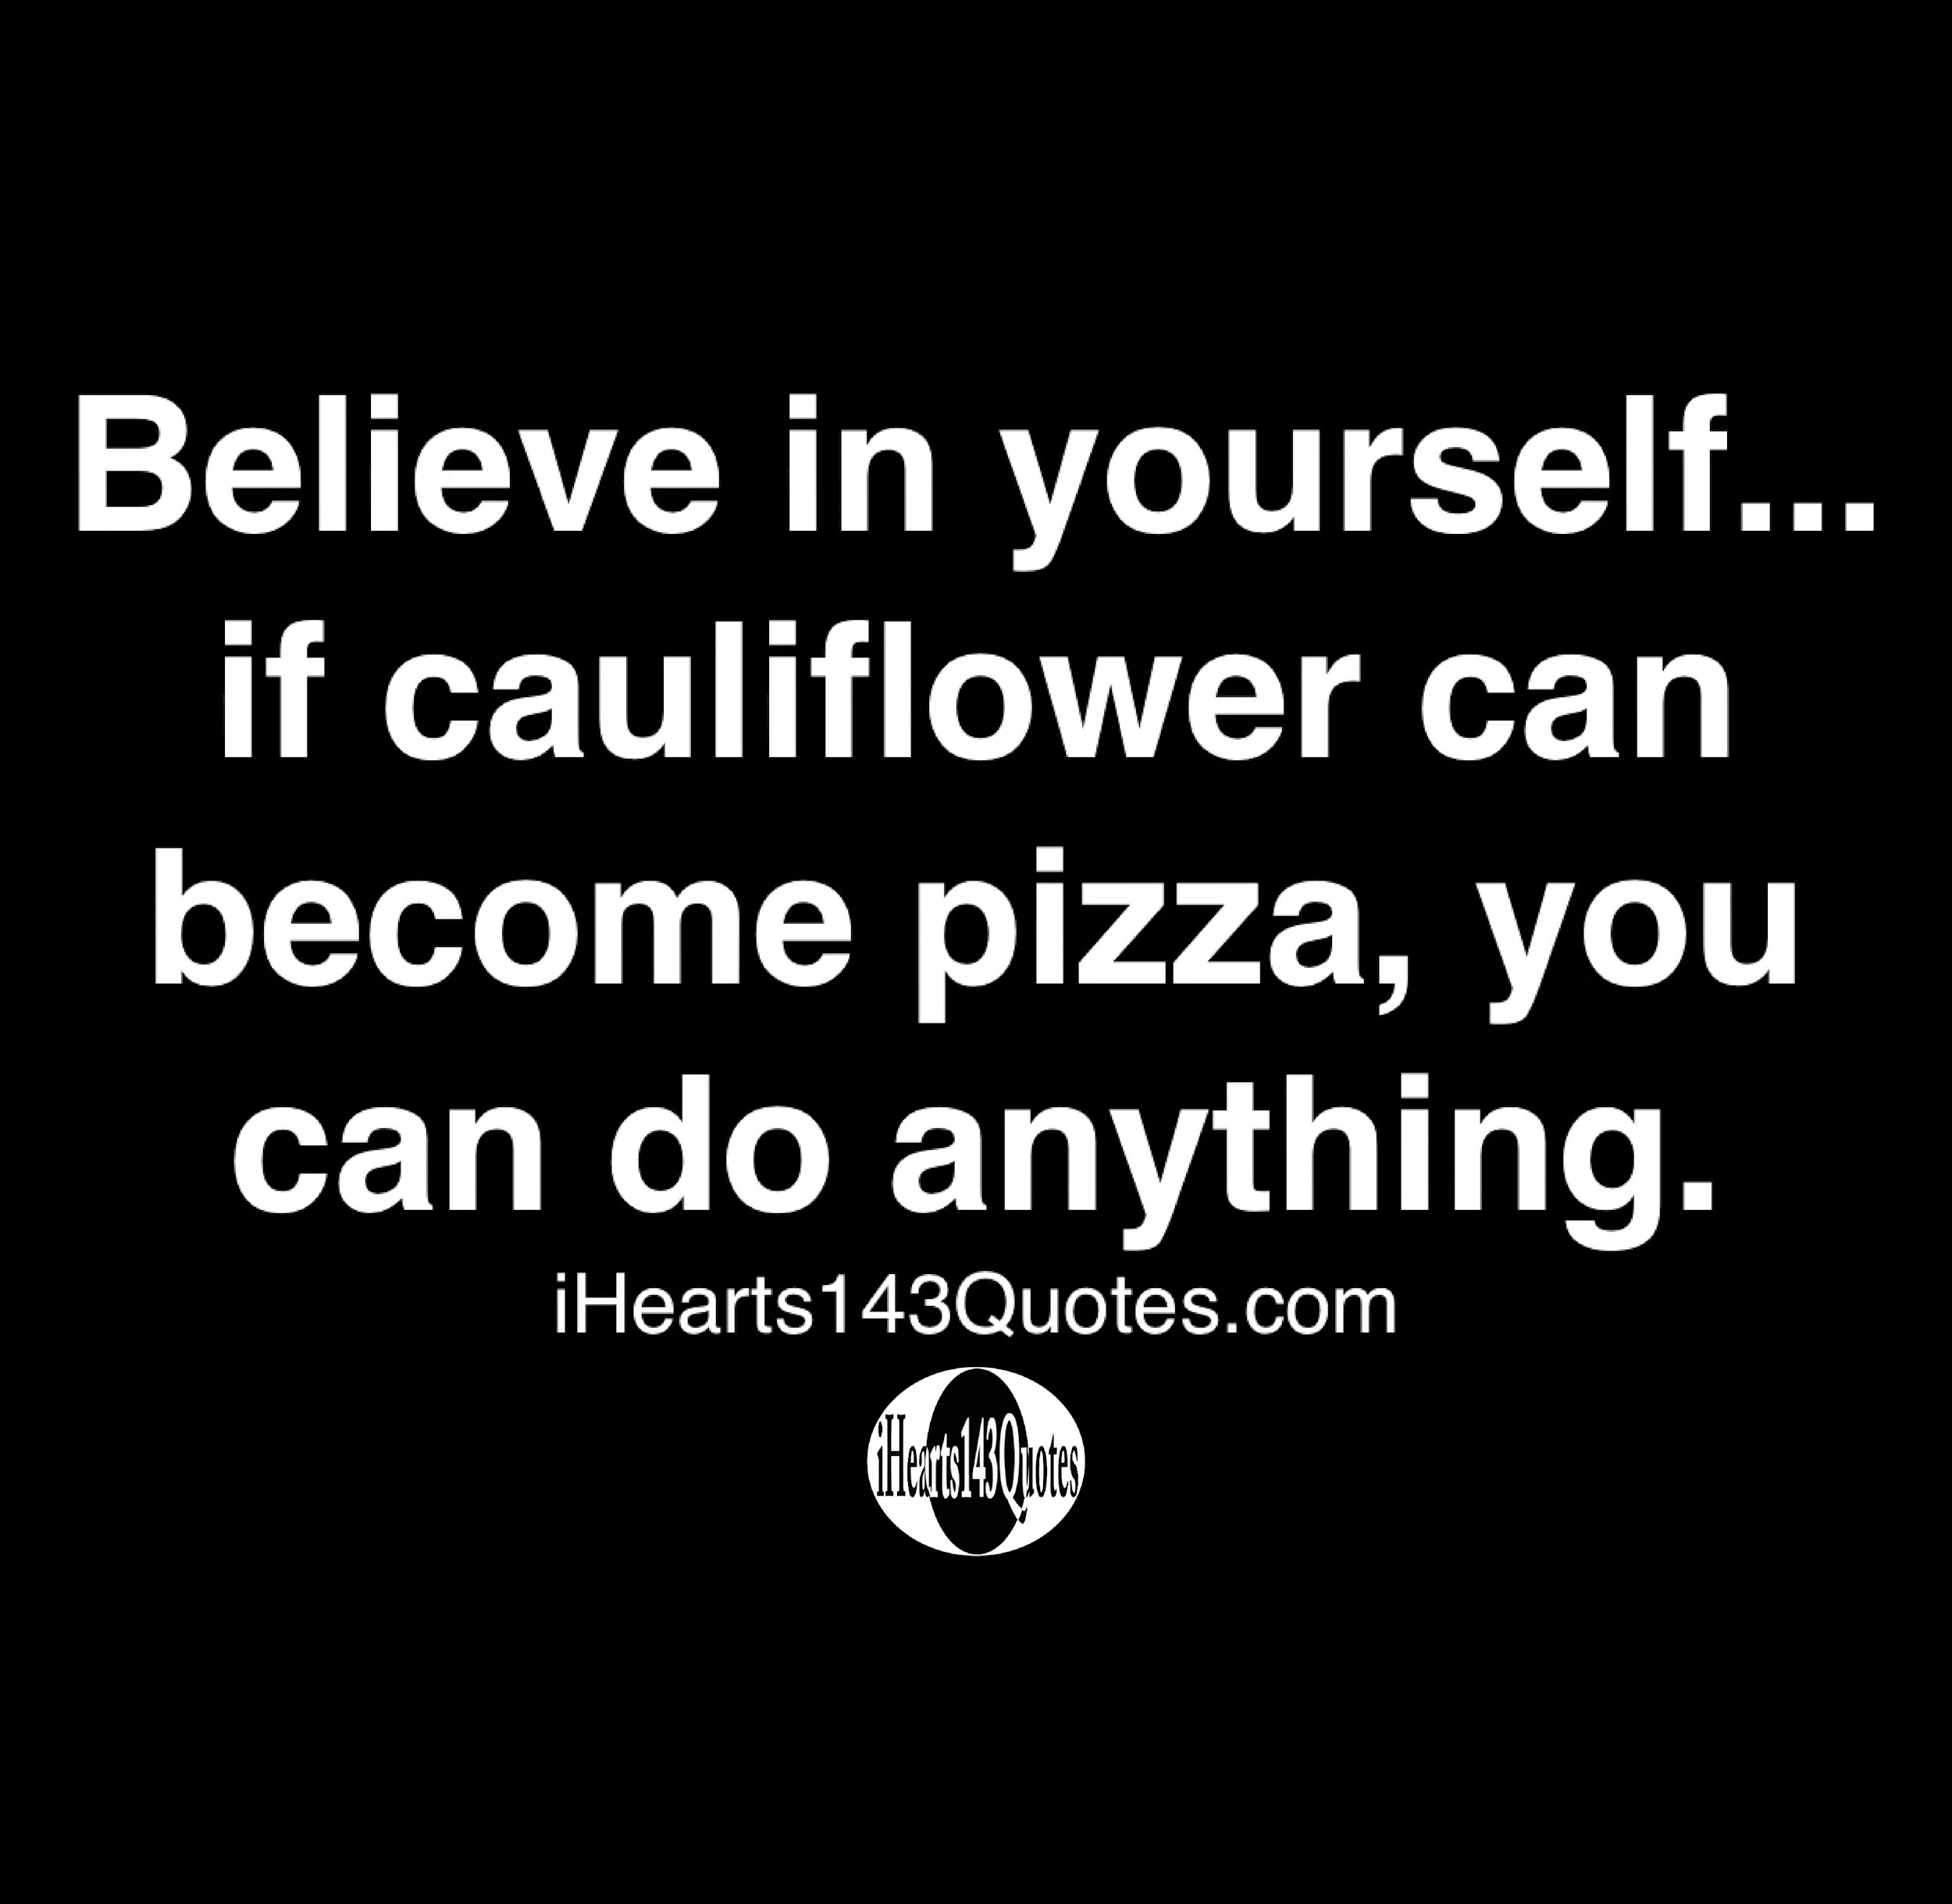 Believe In Yourself If Cauliflower Can Become Pizza You Can Do Anything Quotes Ihearts143quotes